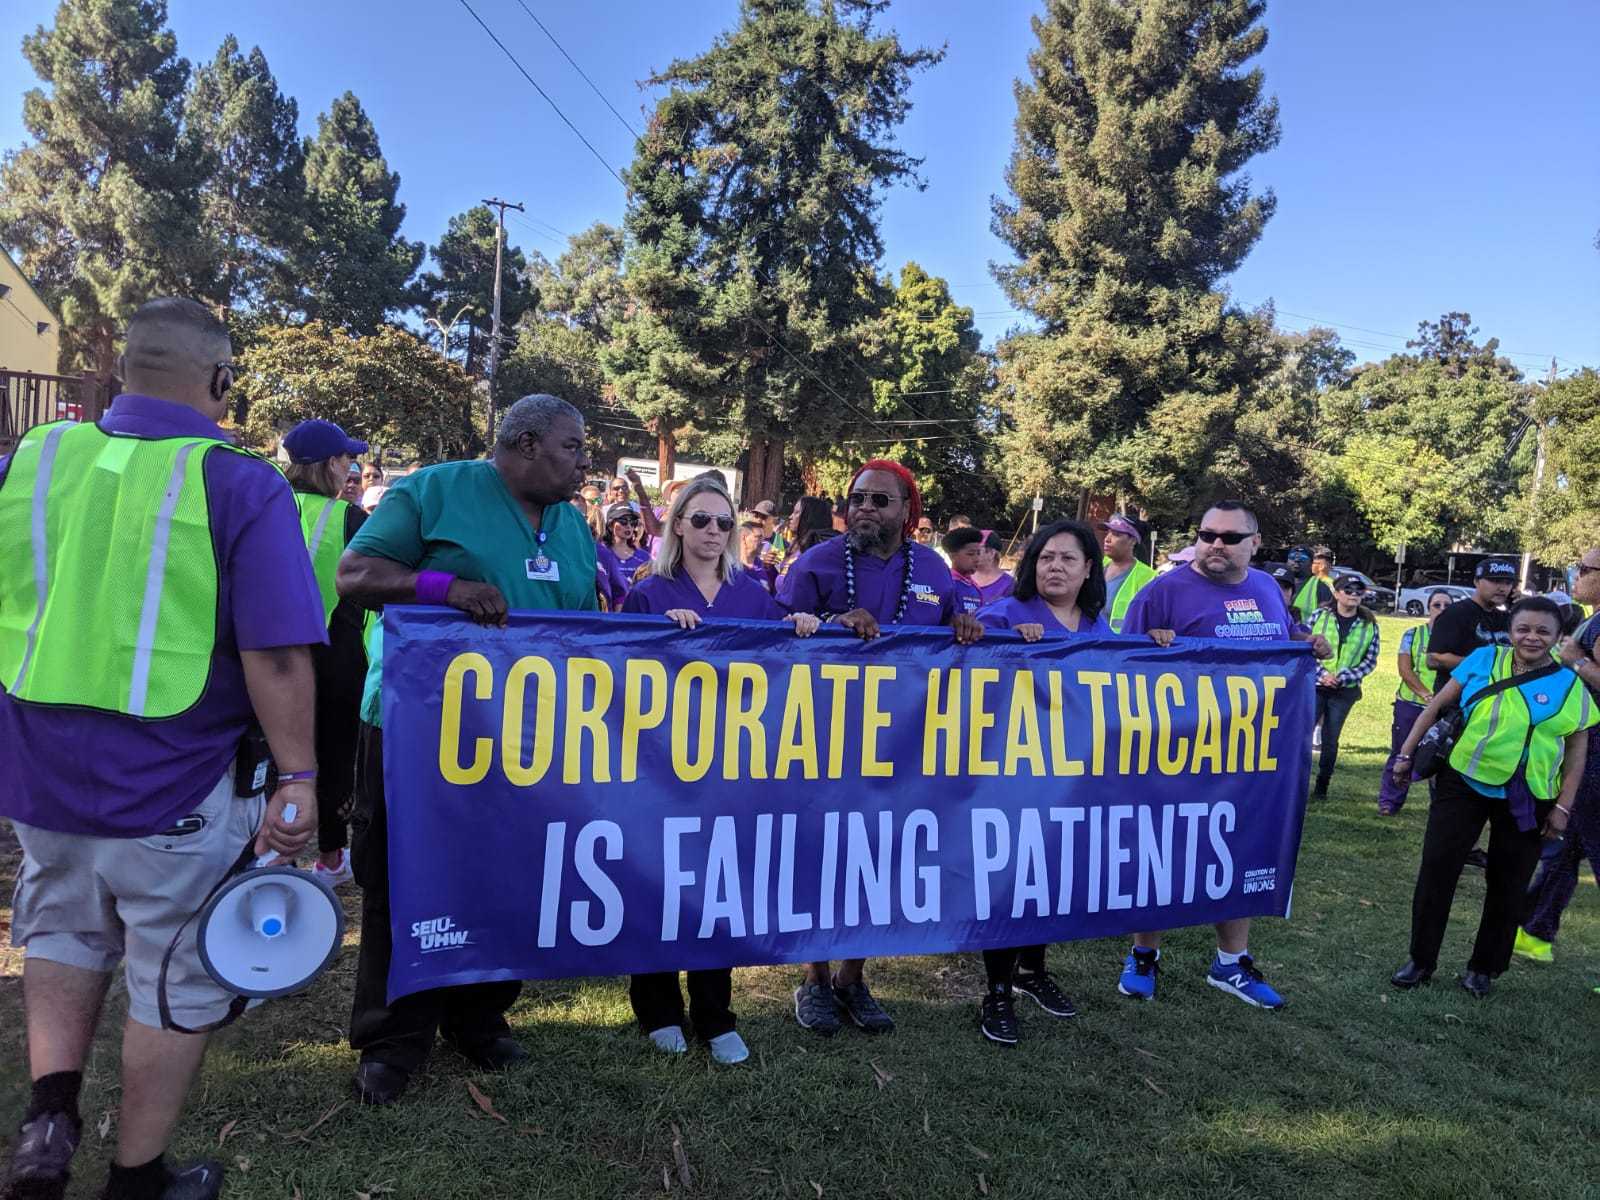 Kaiser workers set to strike for better patient care and working